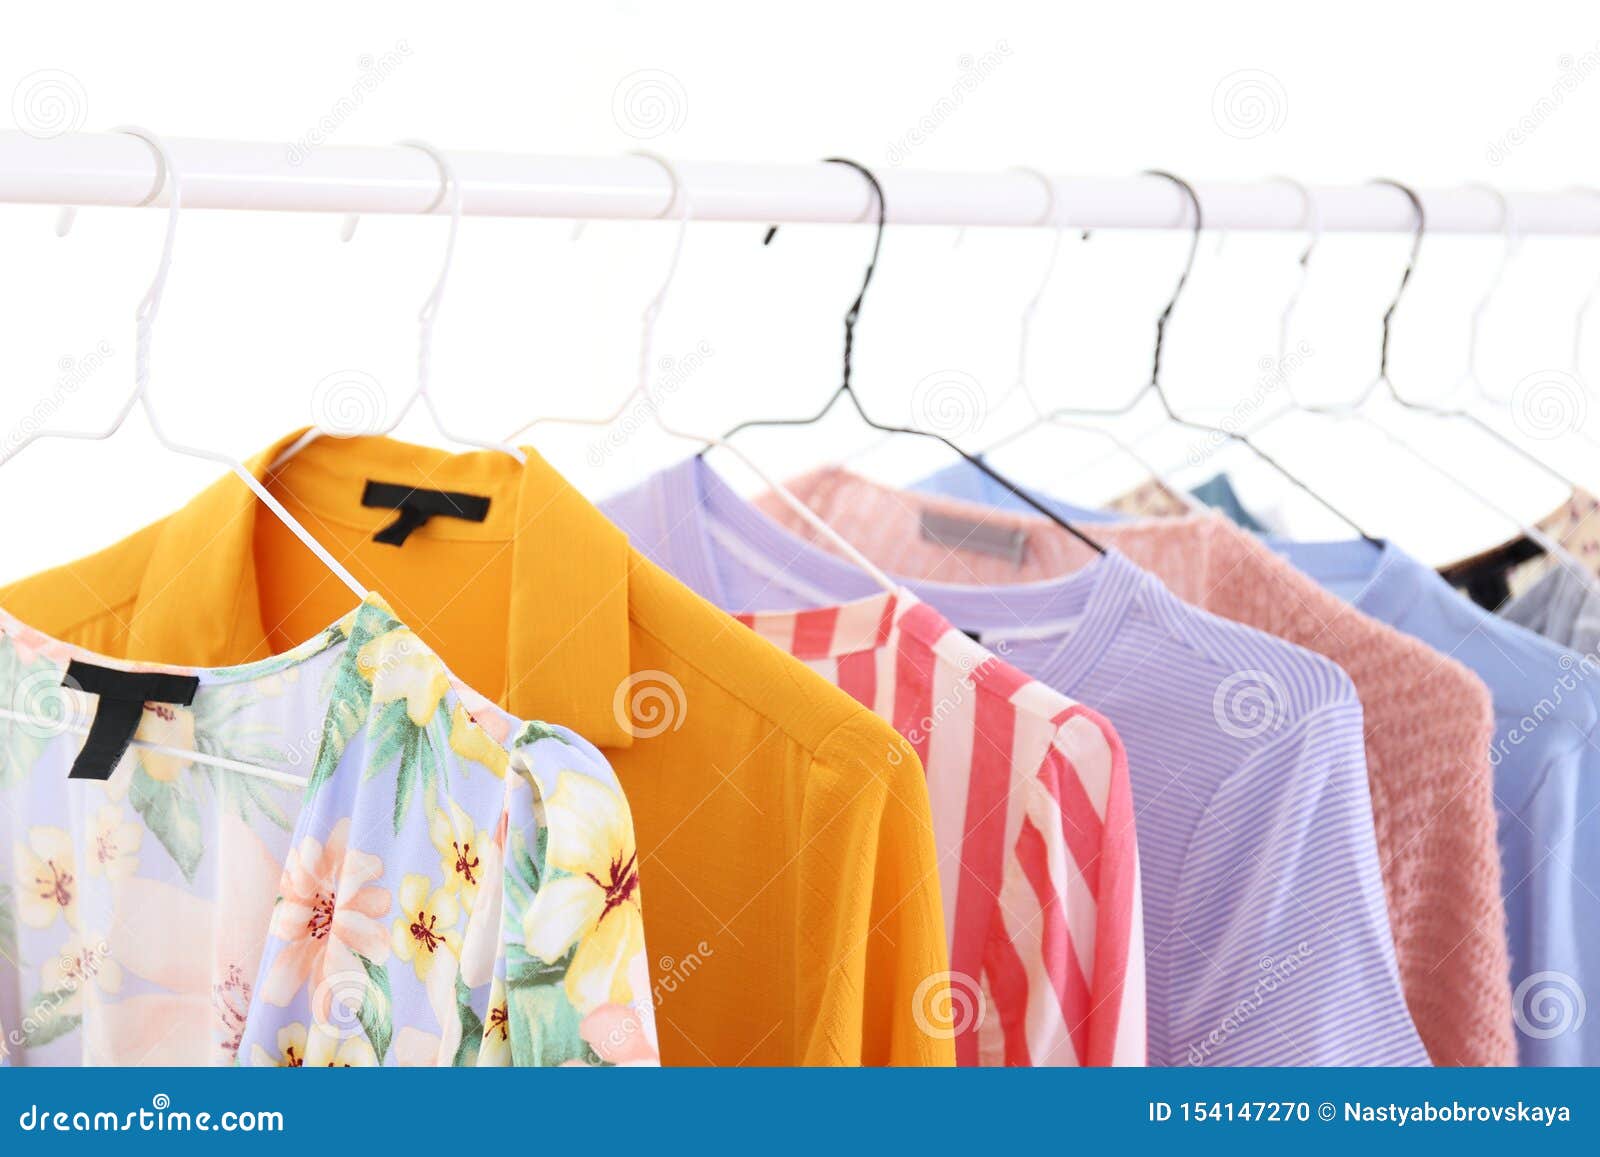 Different Colorful Casual Clothing Hanging in Row Stock Photo - Image ...